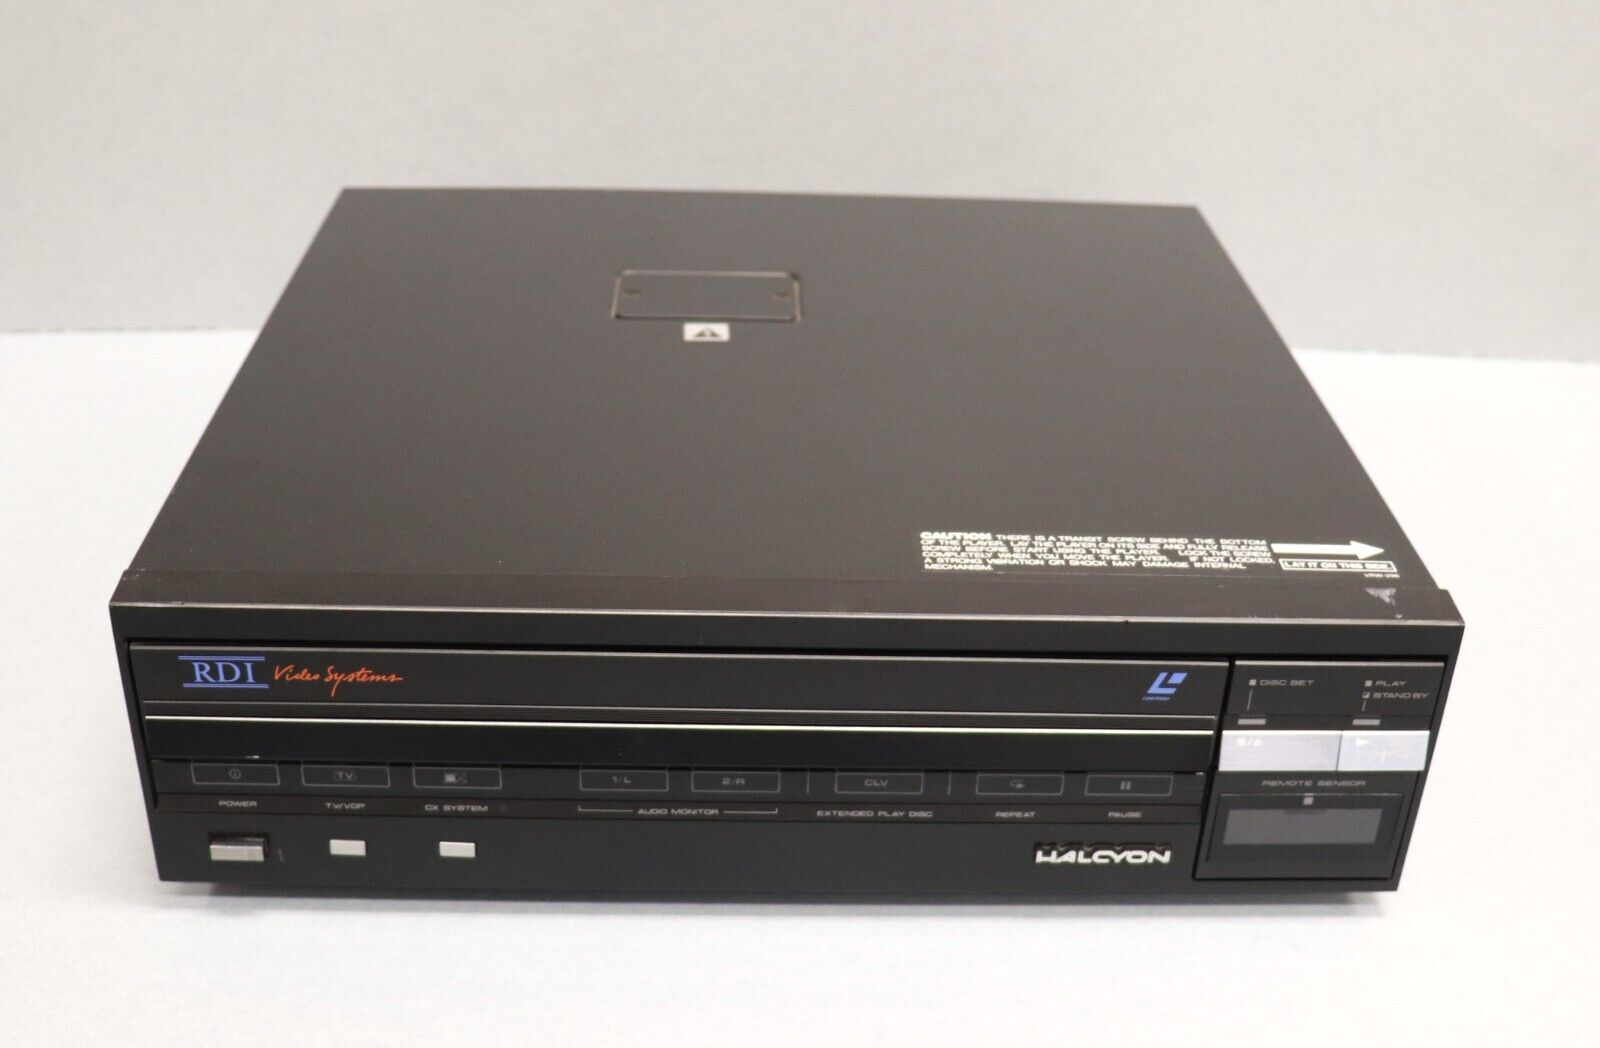 EXTREMELY RARE Halcyon by RDI Video Systems Model 200 LD